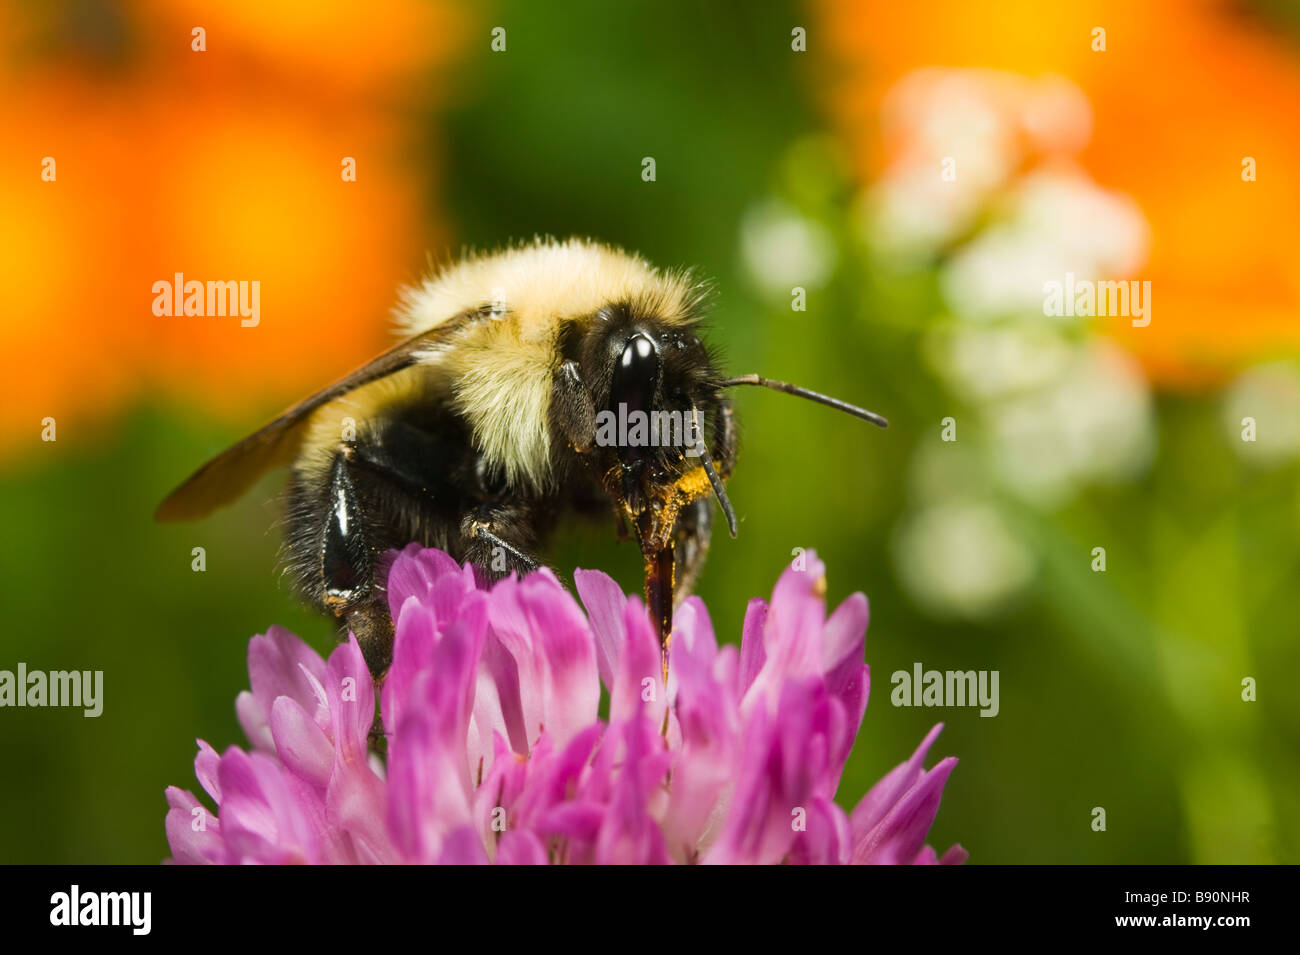 Macro shot of a bumblebee pollinating  a clover blossom. Stock Photo